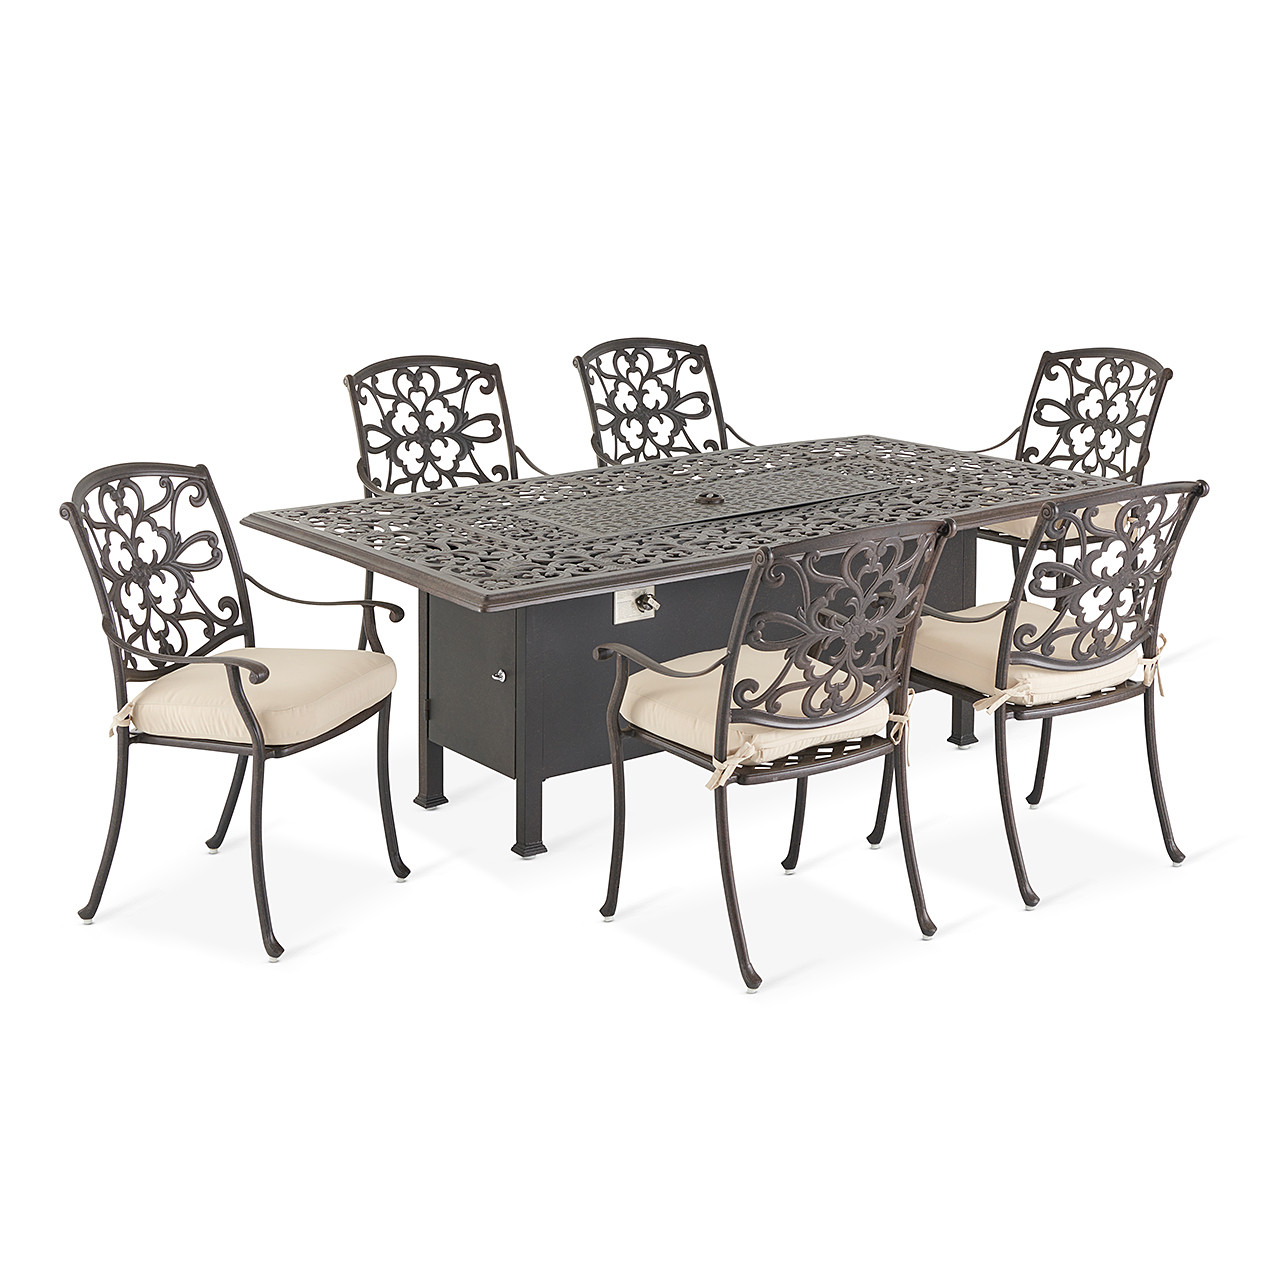 Carlisle Aged Bronze Cast Aluminum and Cushion 7 Pc. Dining Set with 84 x 44 in. Fire Pit Table